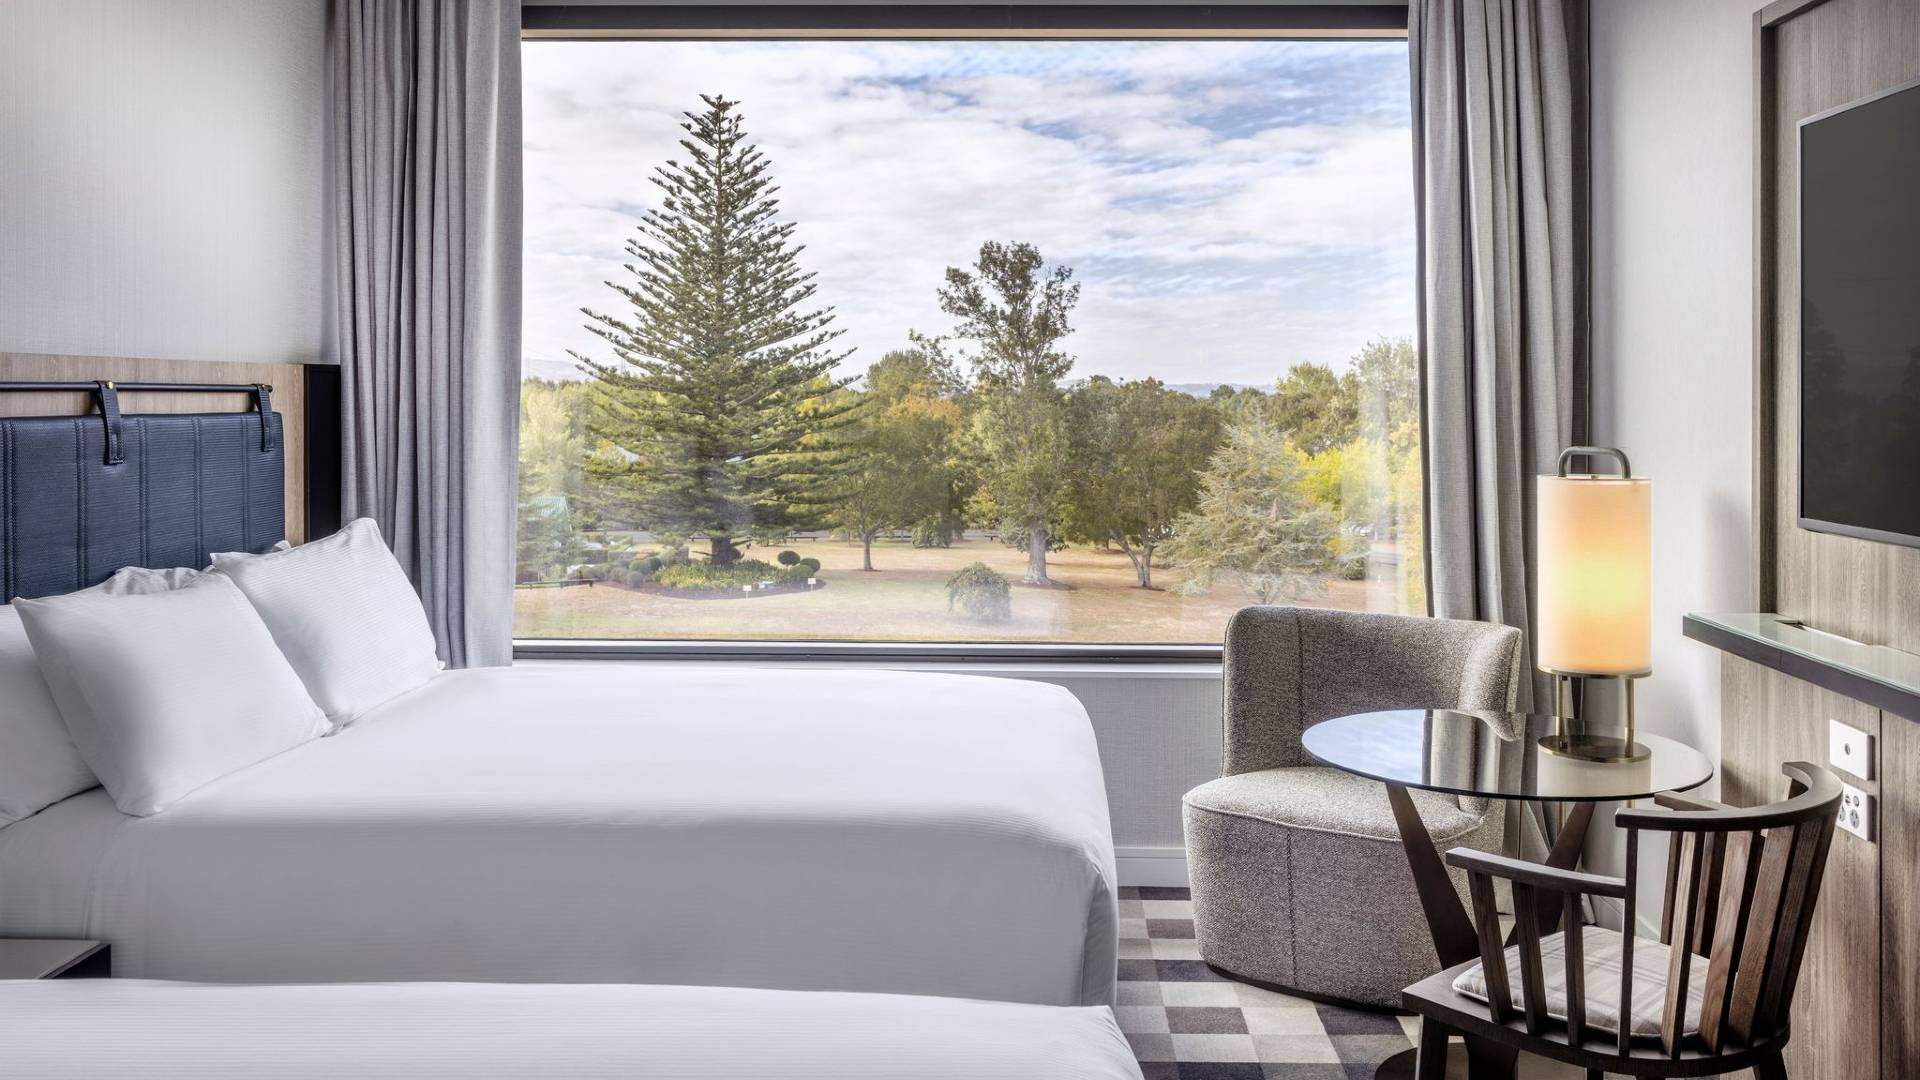 A Brand-New Luxury Hilton Hotel Is Opening in Karaka South of Auckland This Week